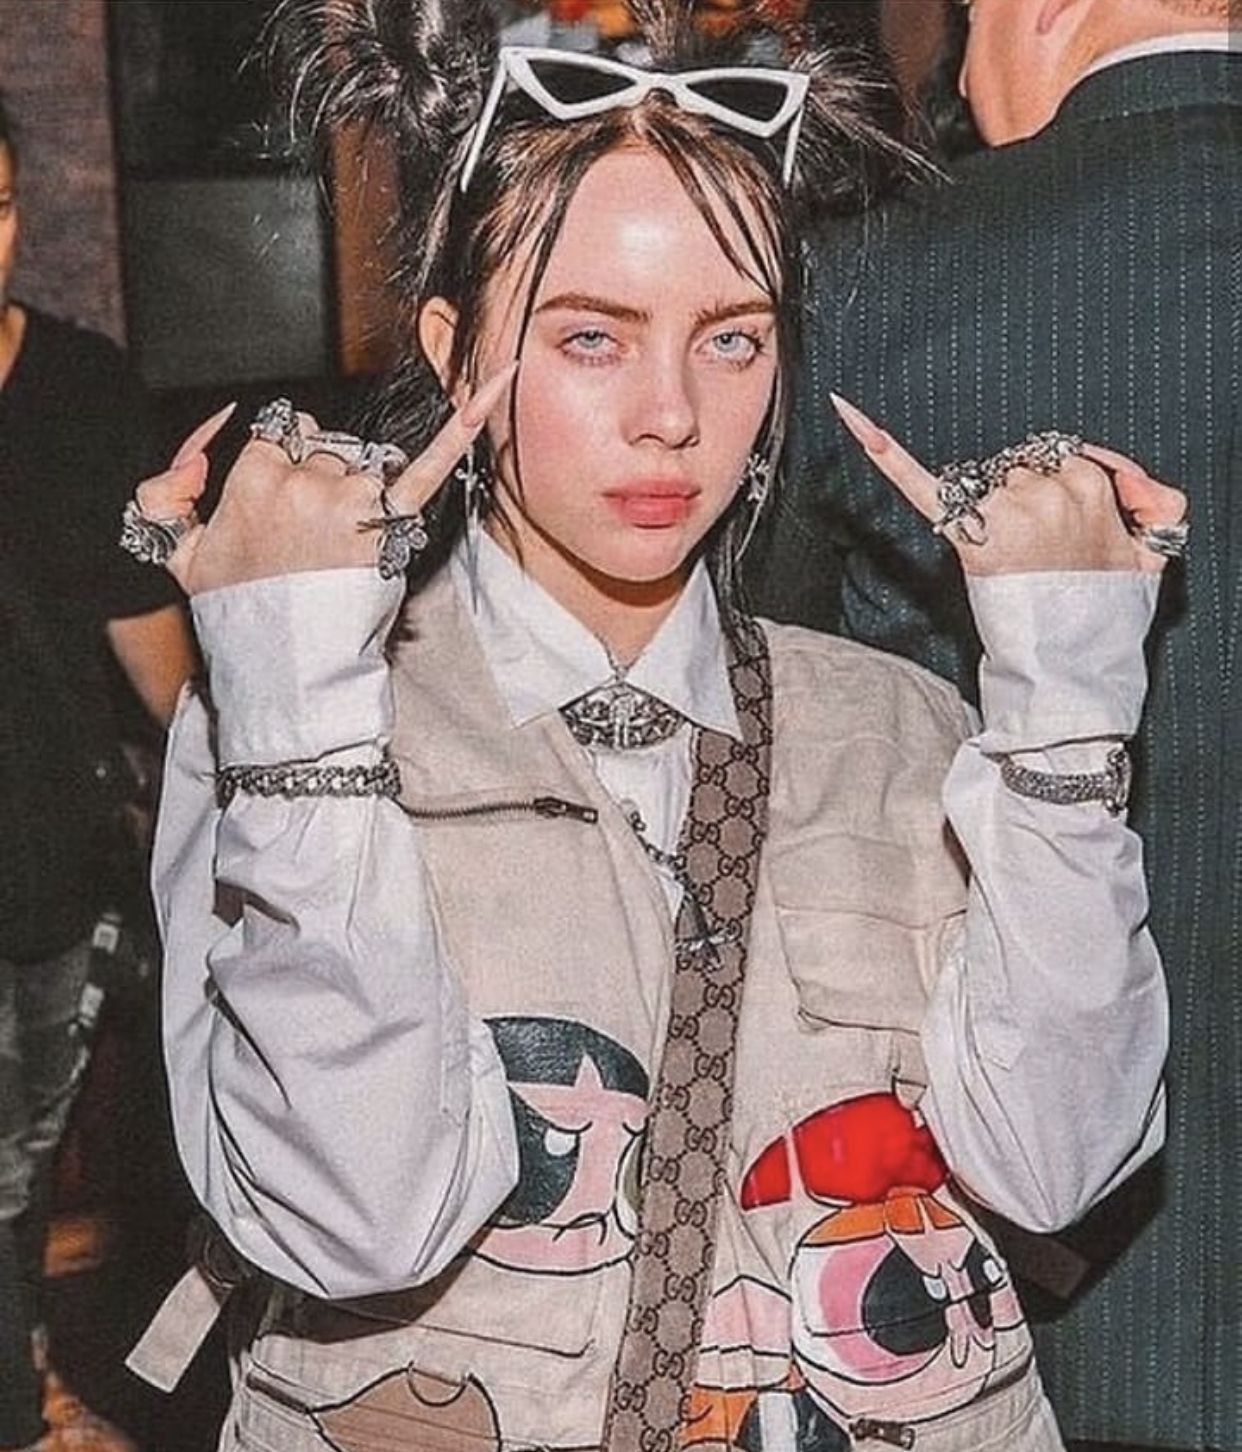 Billie Eilish Defends Drake After Fans Criticize Their Relationship - Billie Eilish Defends Drake After Fans Criticize Their Relationship -   17 billie eilish style Aesthetic ideas